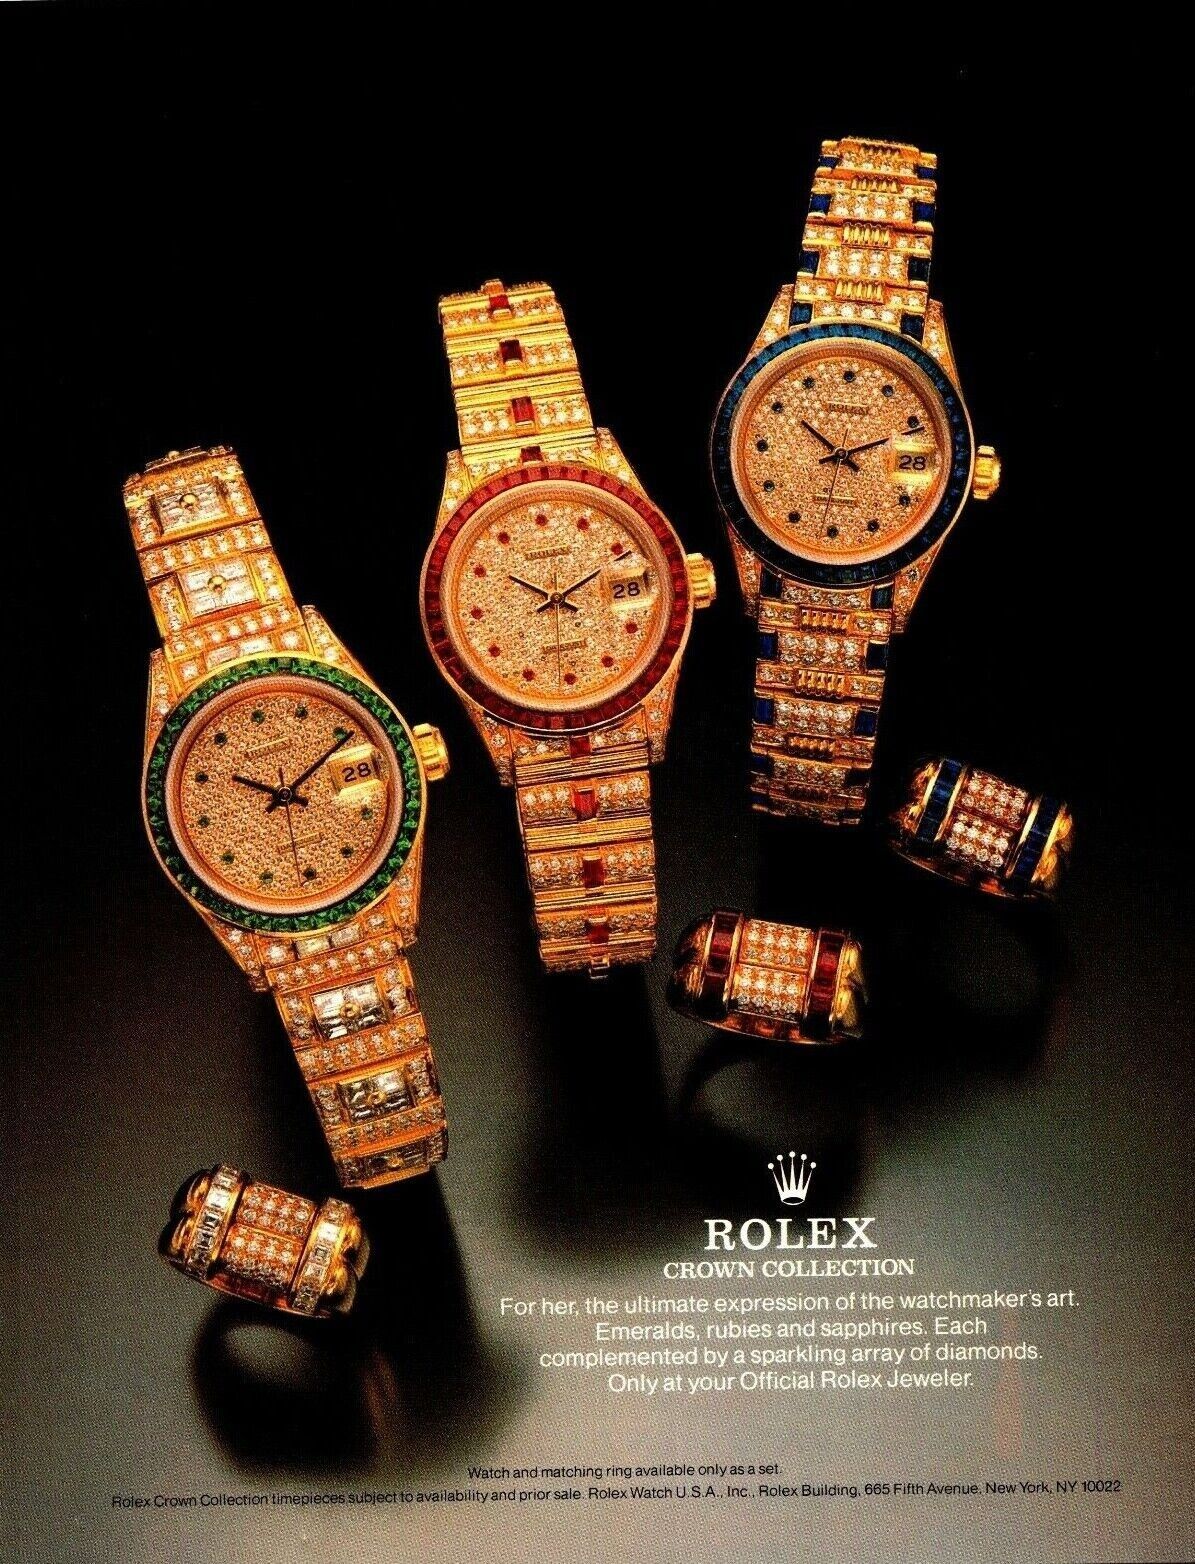 Vintage 1987 Rolex Crown Collection Watch Print Ad High Quality Print Gloss